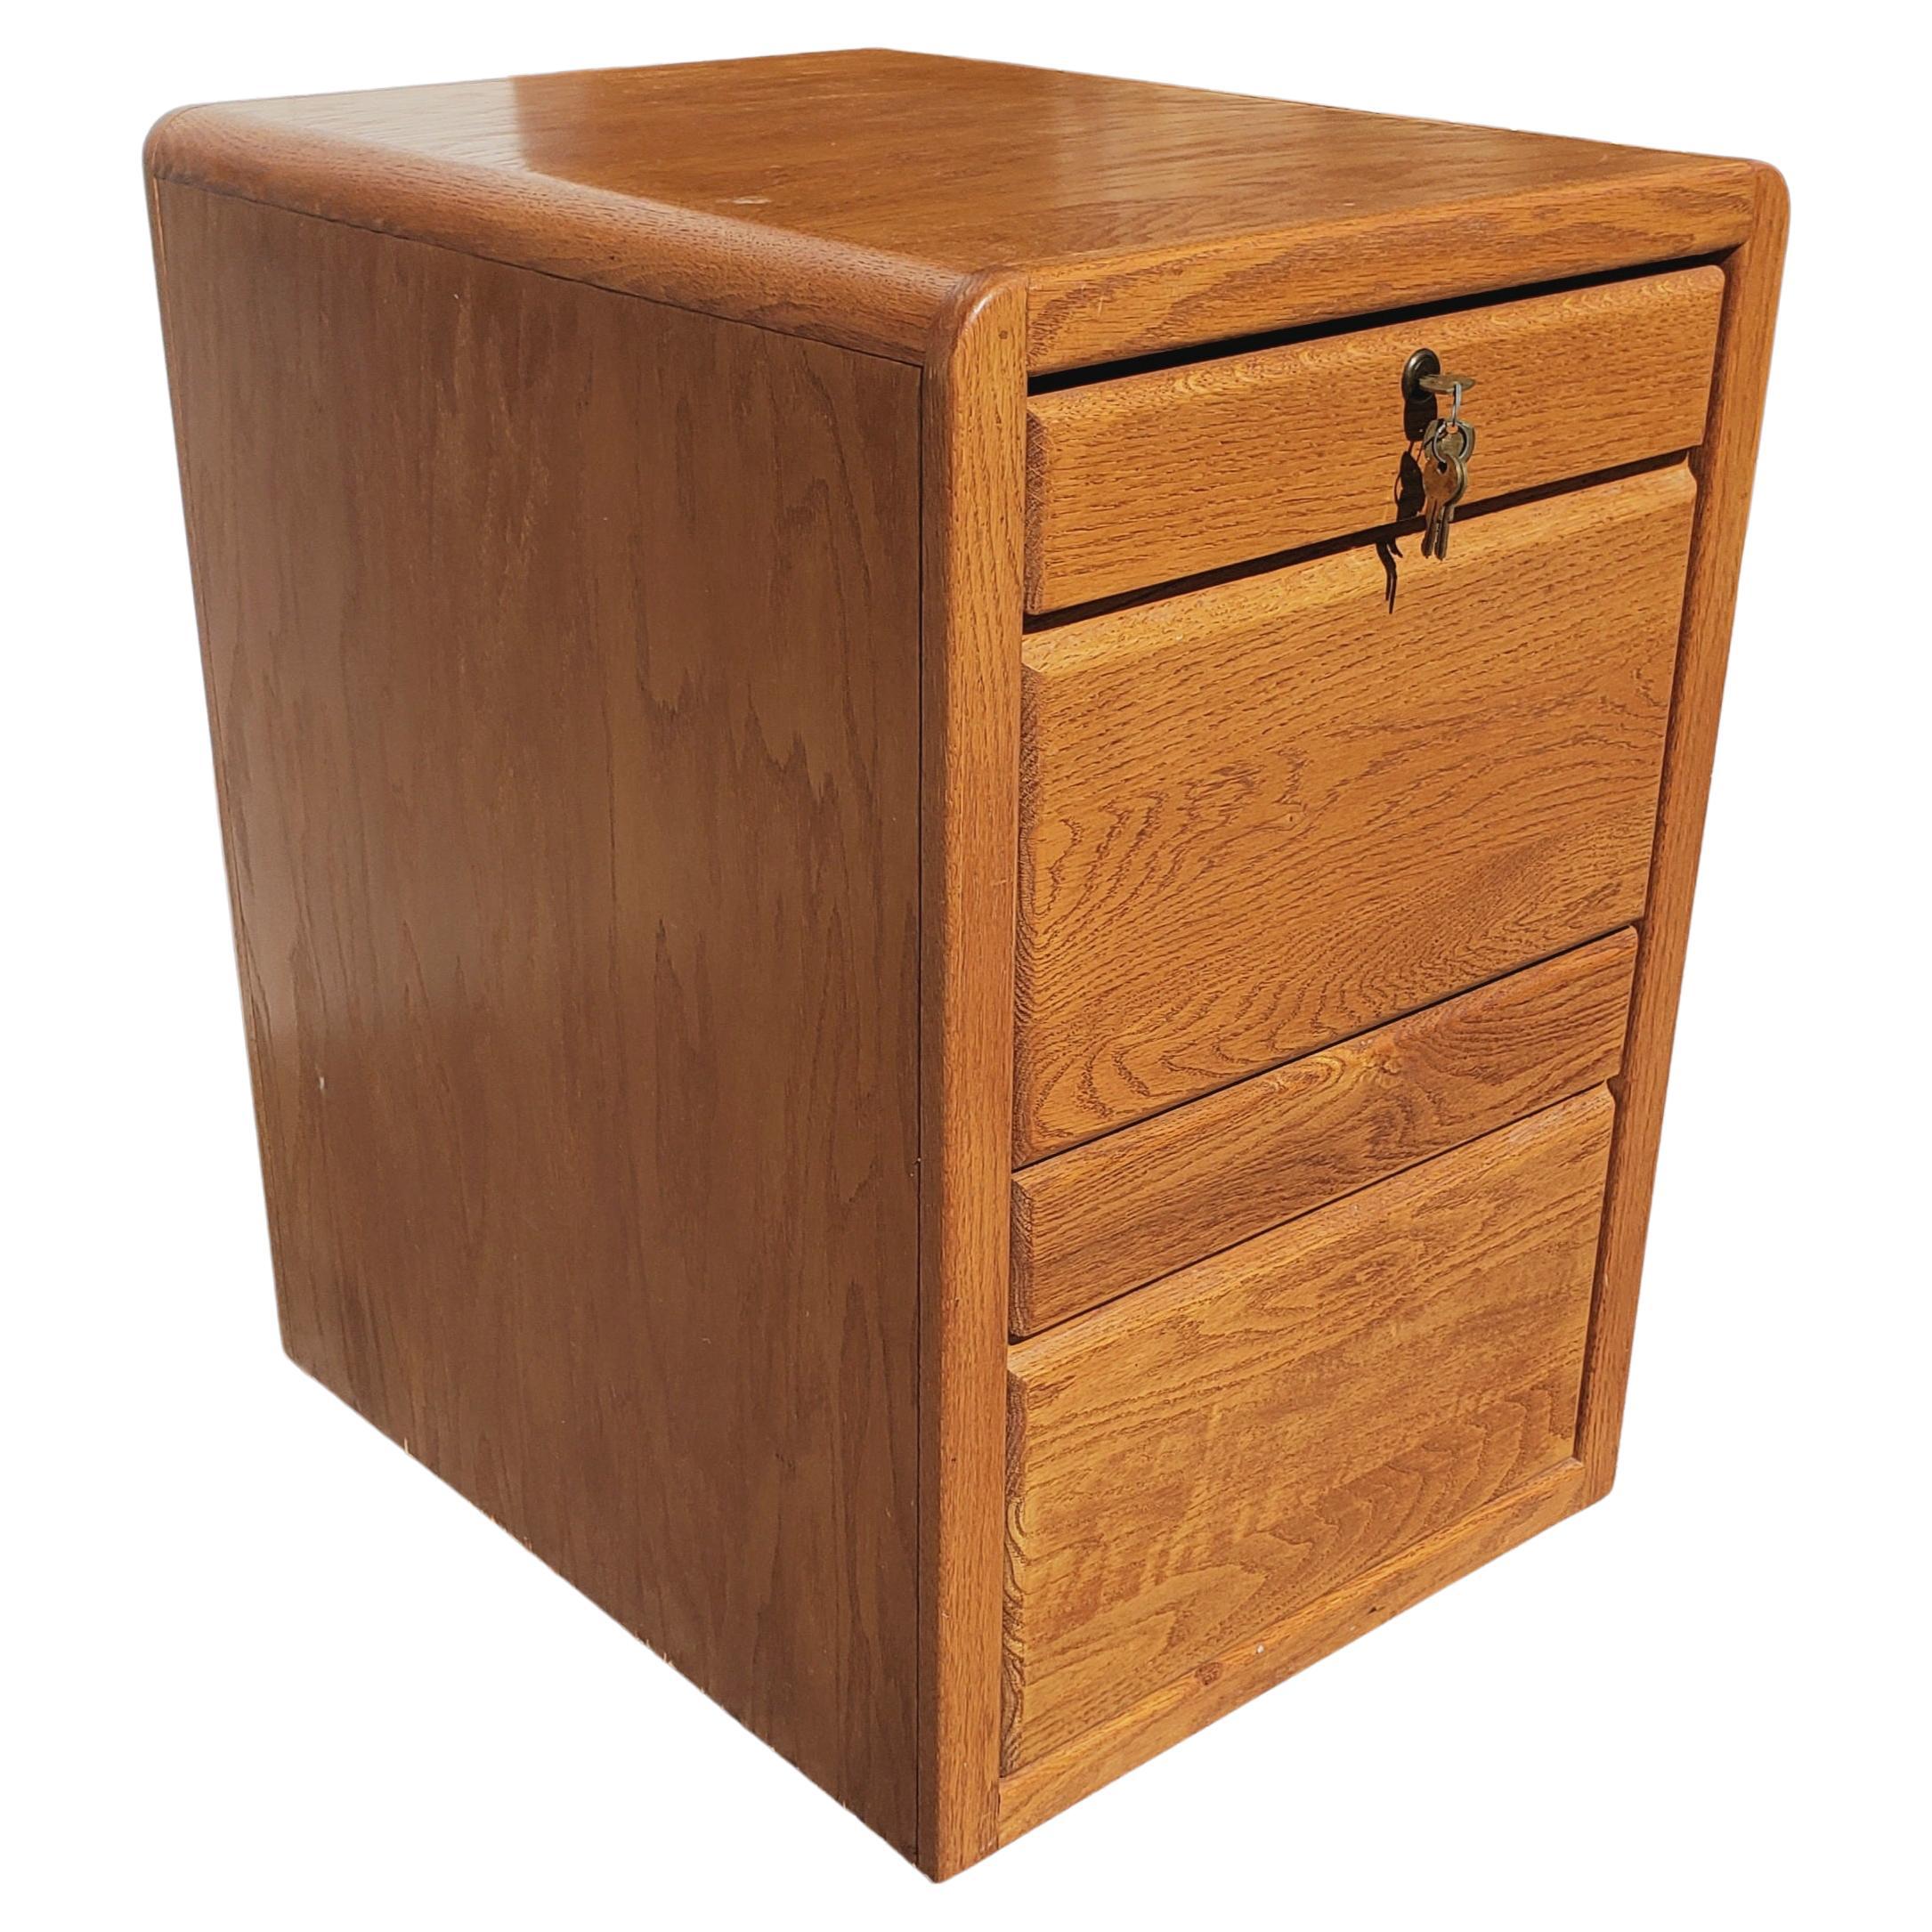 Vintage Two drawer oak legal and letter size filing cabinet by Pacific Tambour. Measurements are 20